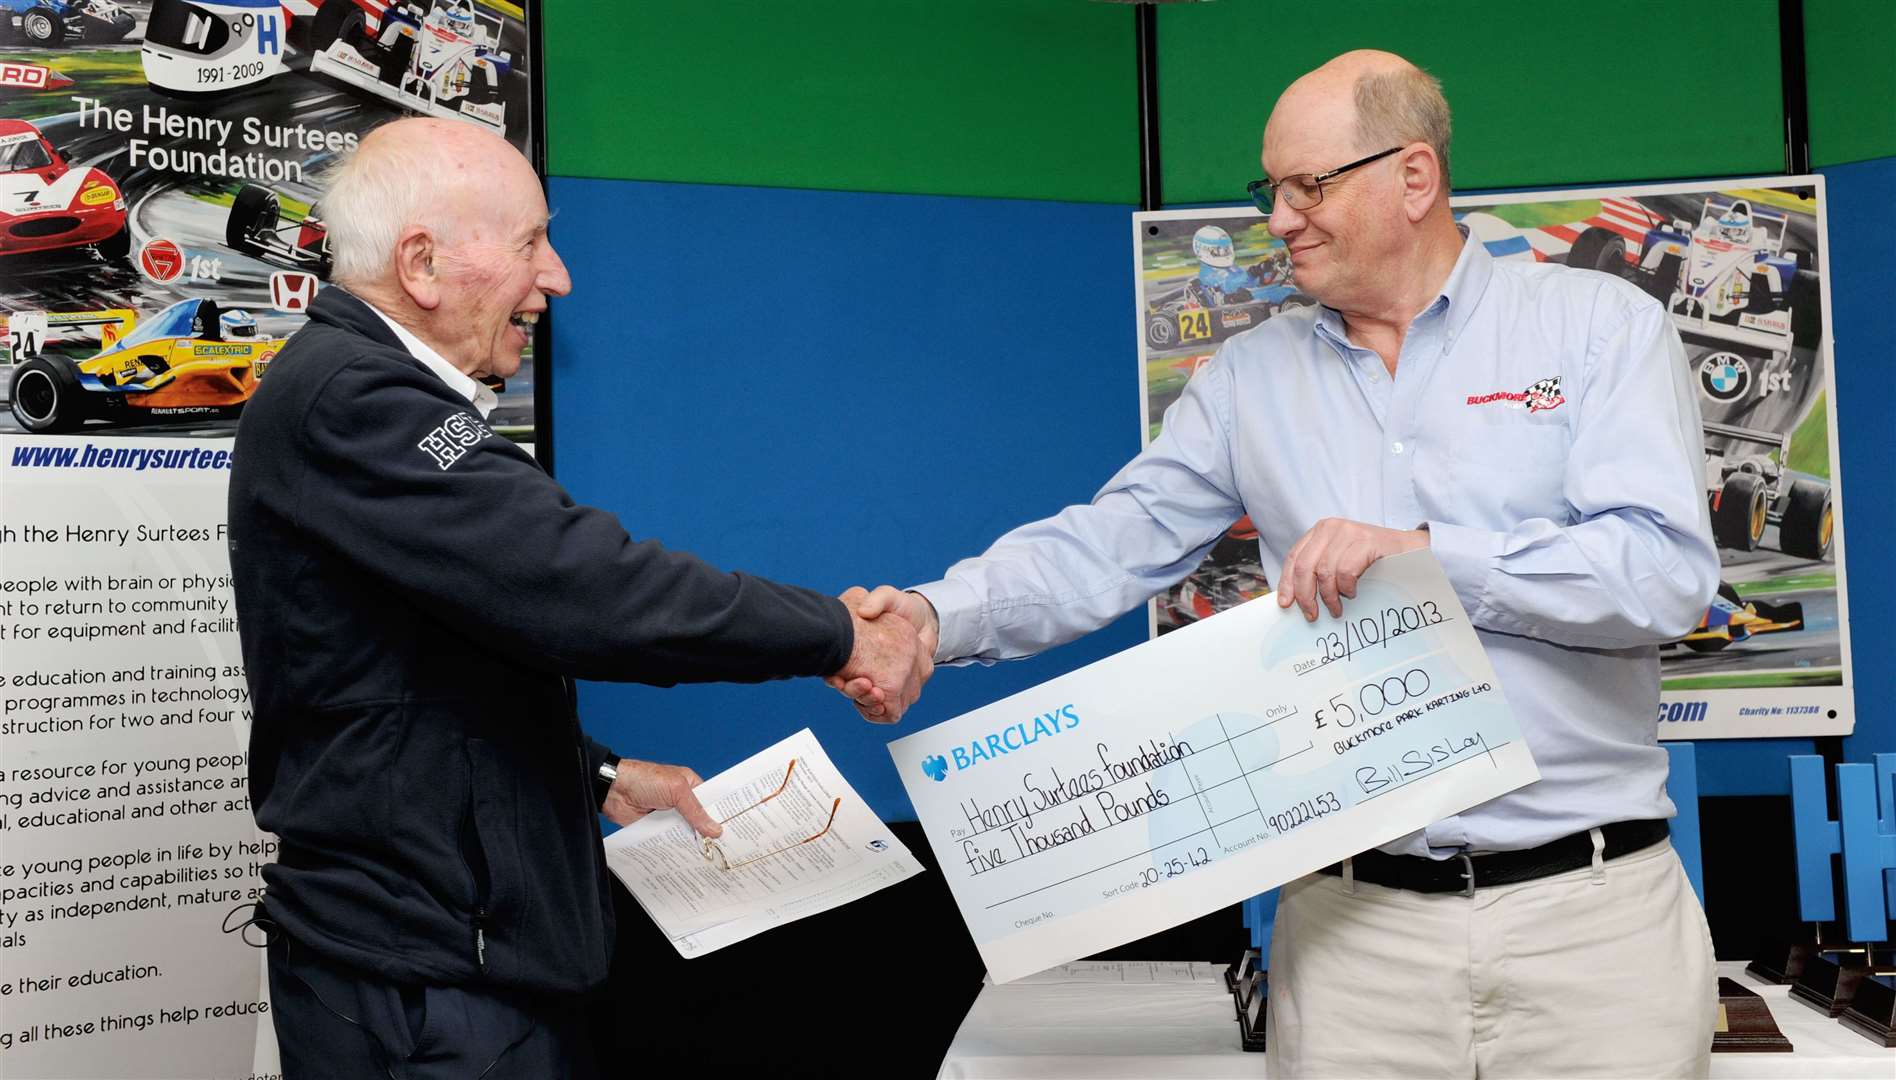 Surtees, who died in March 2017 aged 83, accepts a cheque from Sisley during the Henry Surtees Challenge event in 2013. Picture: Simon Hildrew